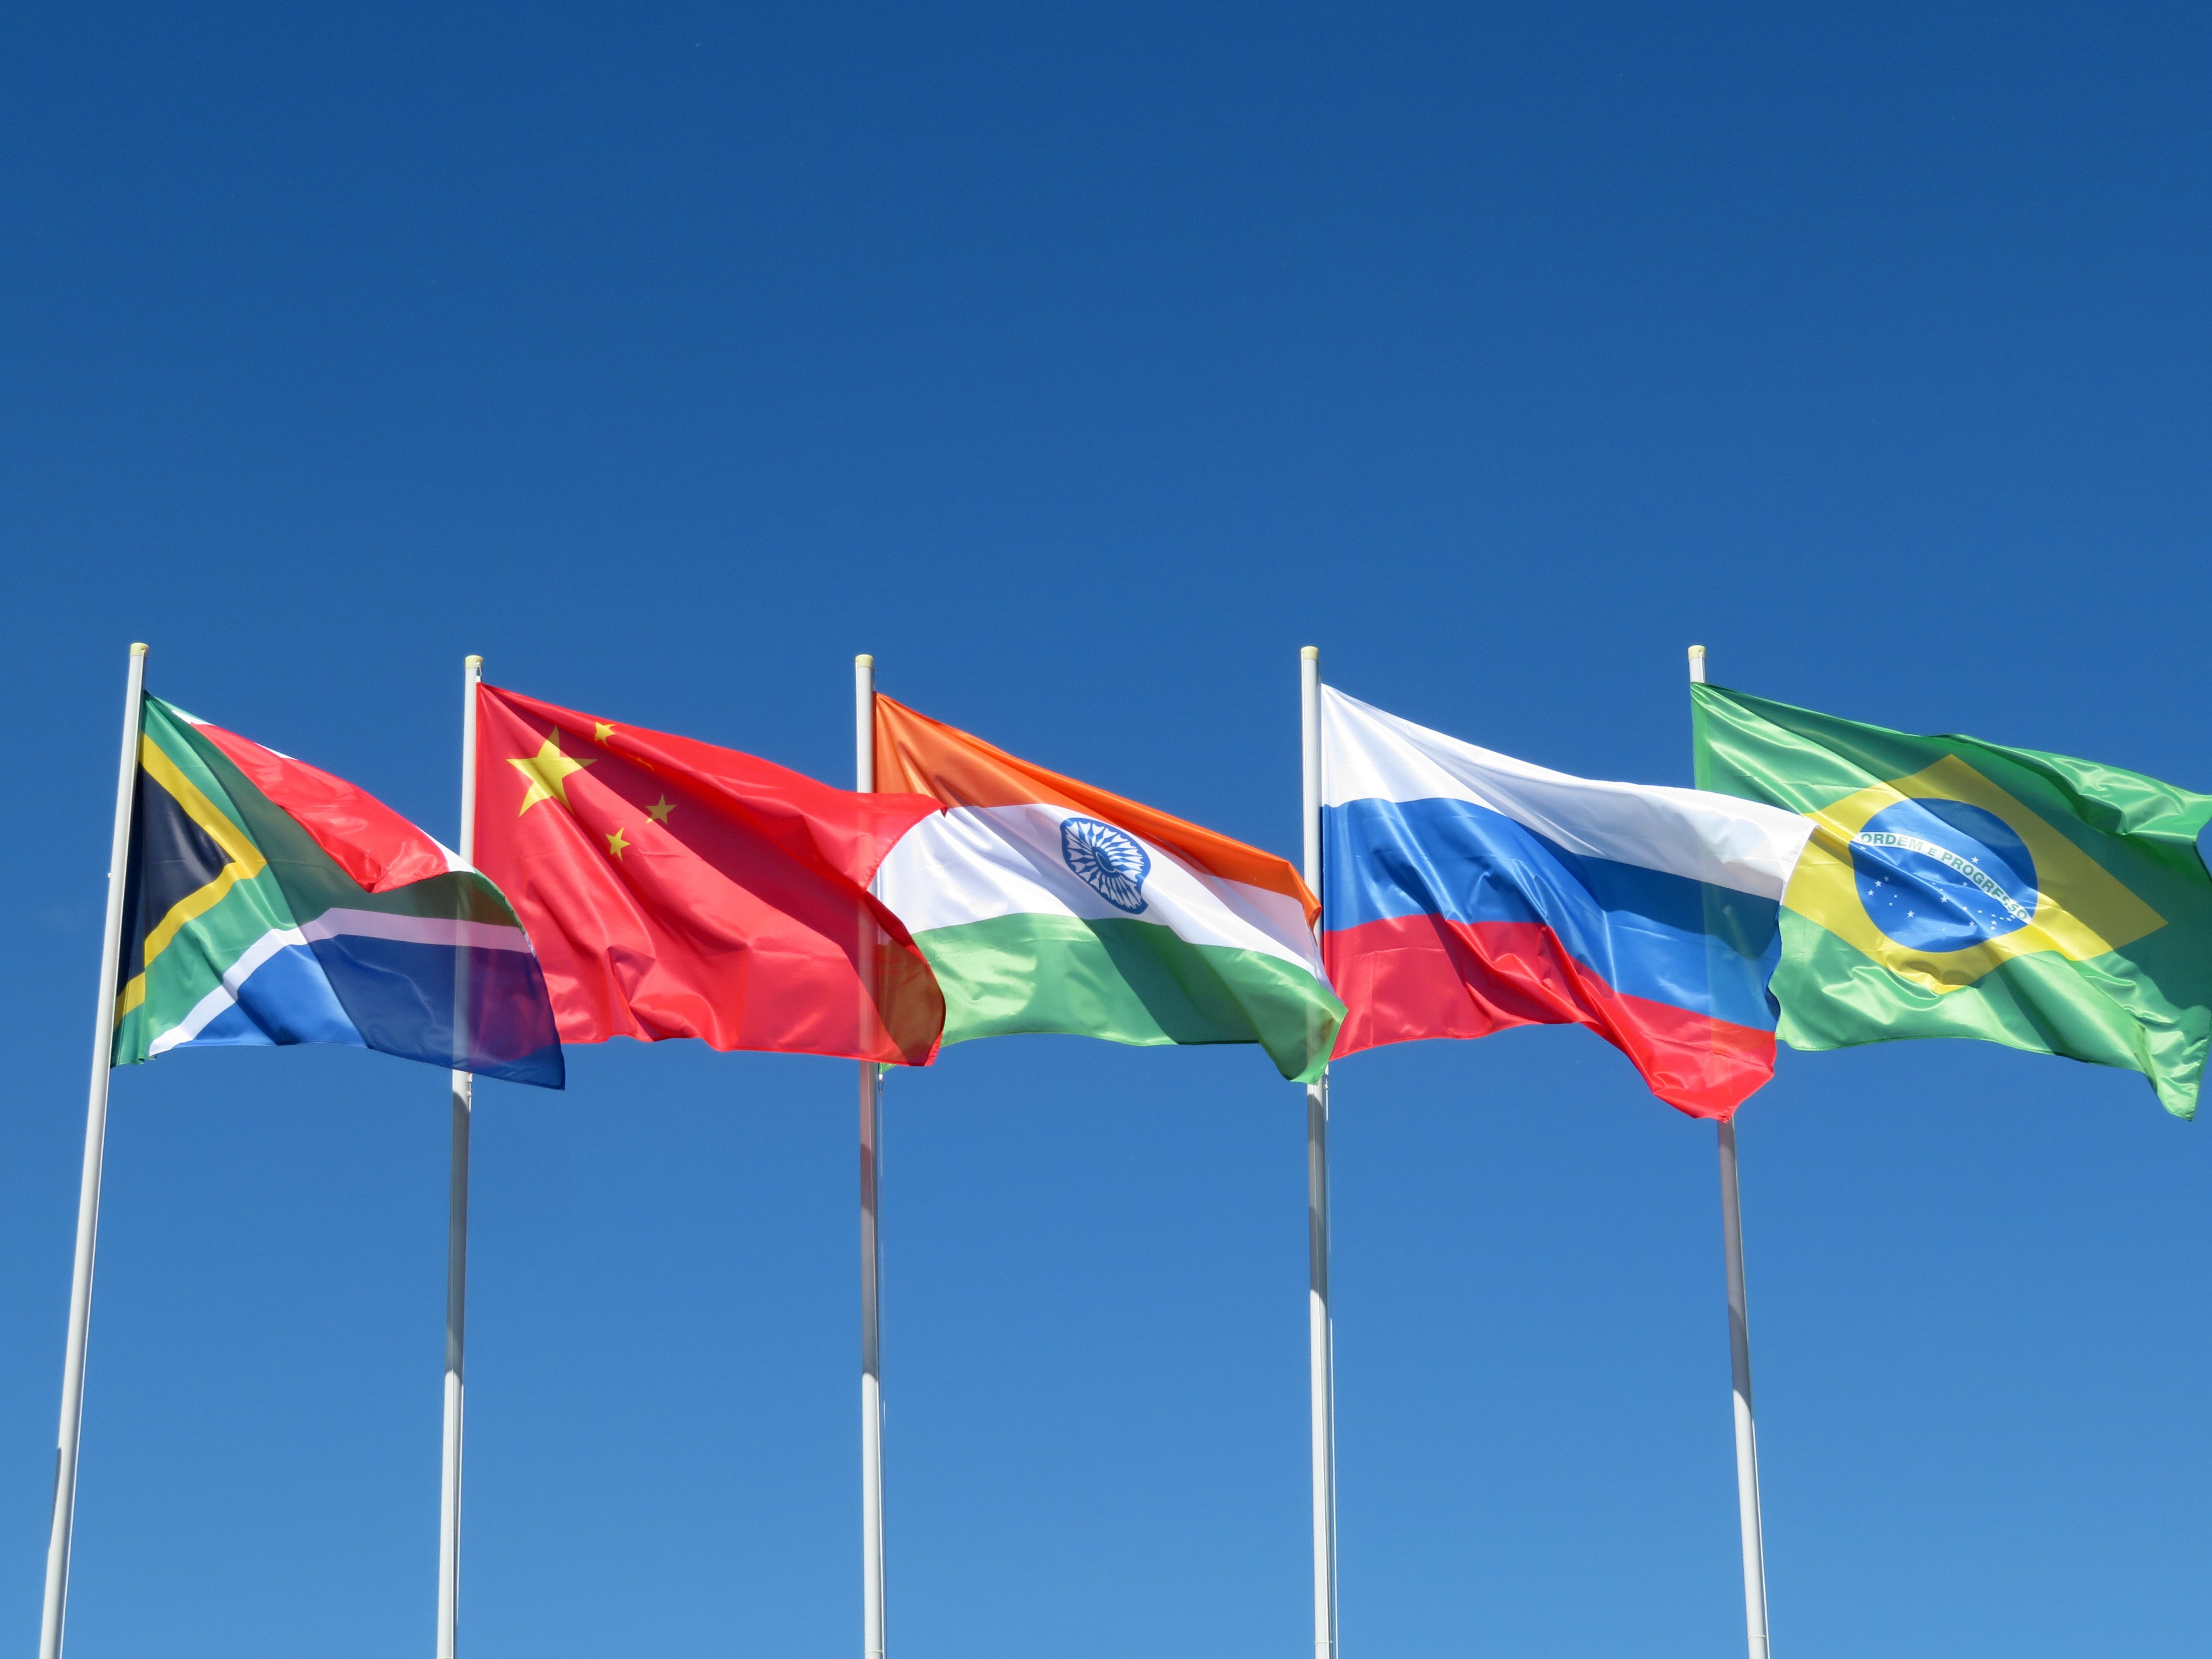 The flags of South Africa, China, India, Russia and Brazil, the five members of BRICS. China, India, Brazil and South Africa are among the nations that have resisted giving up their own interests to punish Russia following the Ukraine war. Photo: Shutterstock
